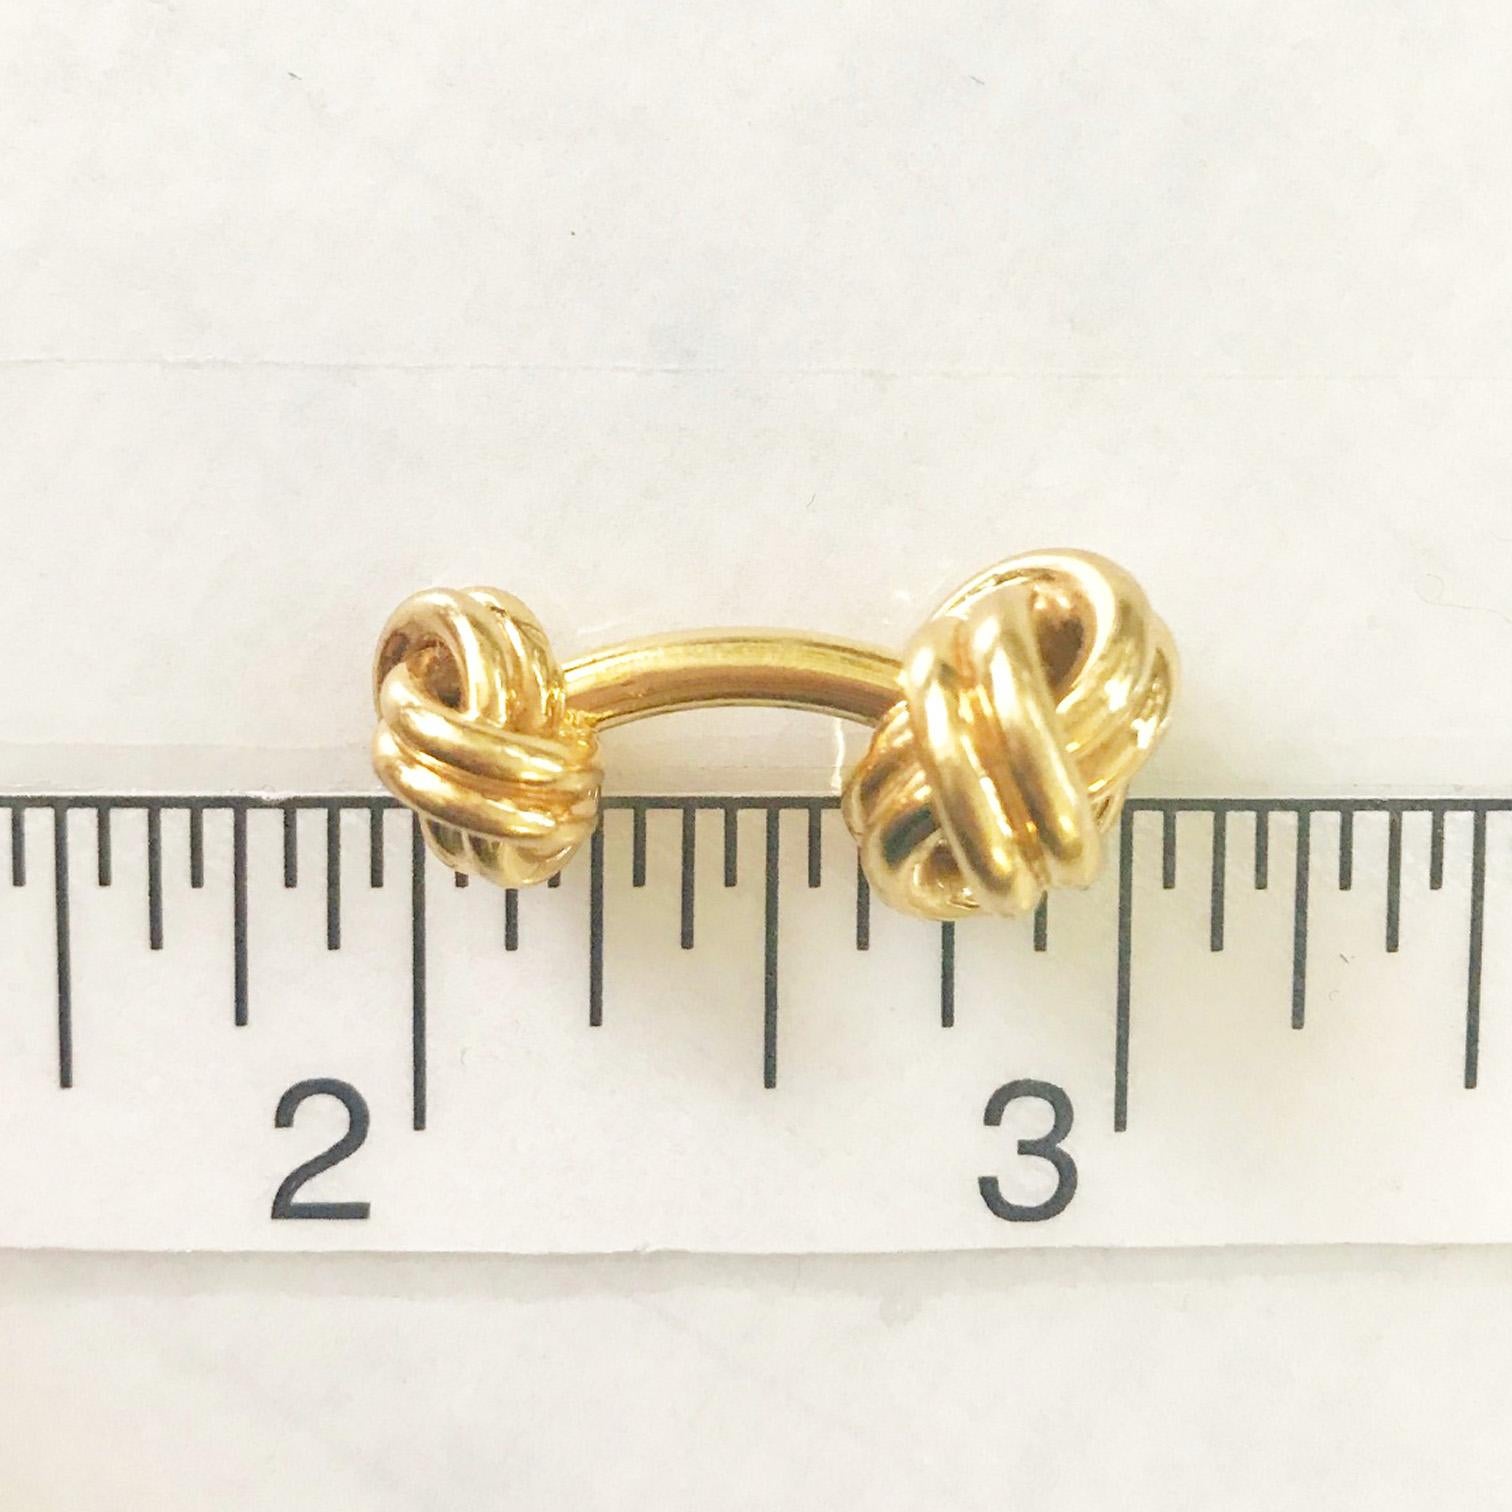 Tiffany & Co. Knot Cufflinks In Excellent Condition For Sale In New York, NY